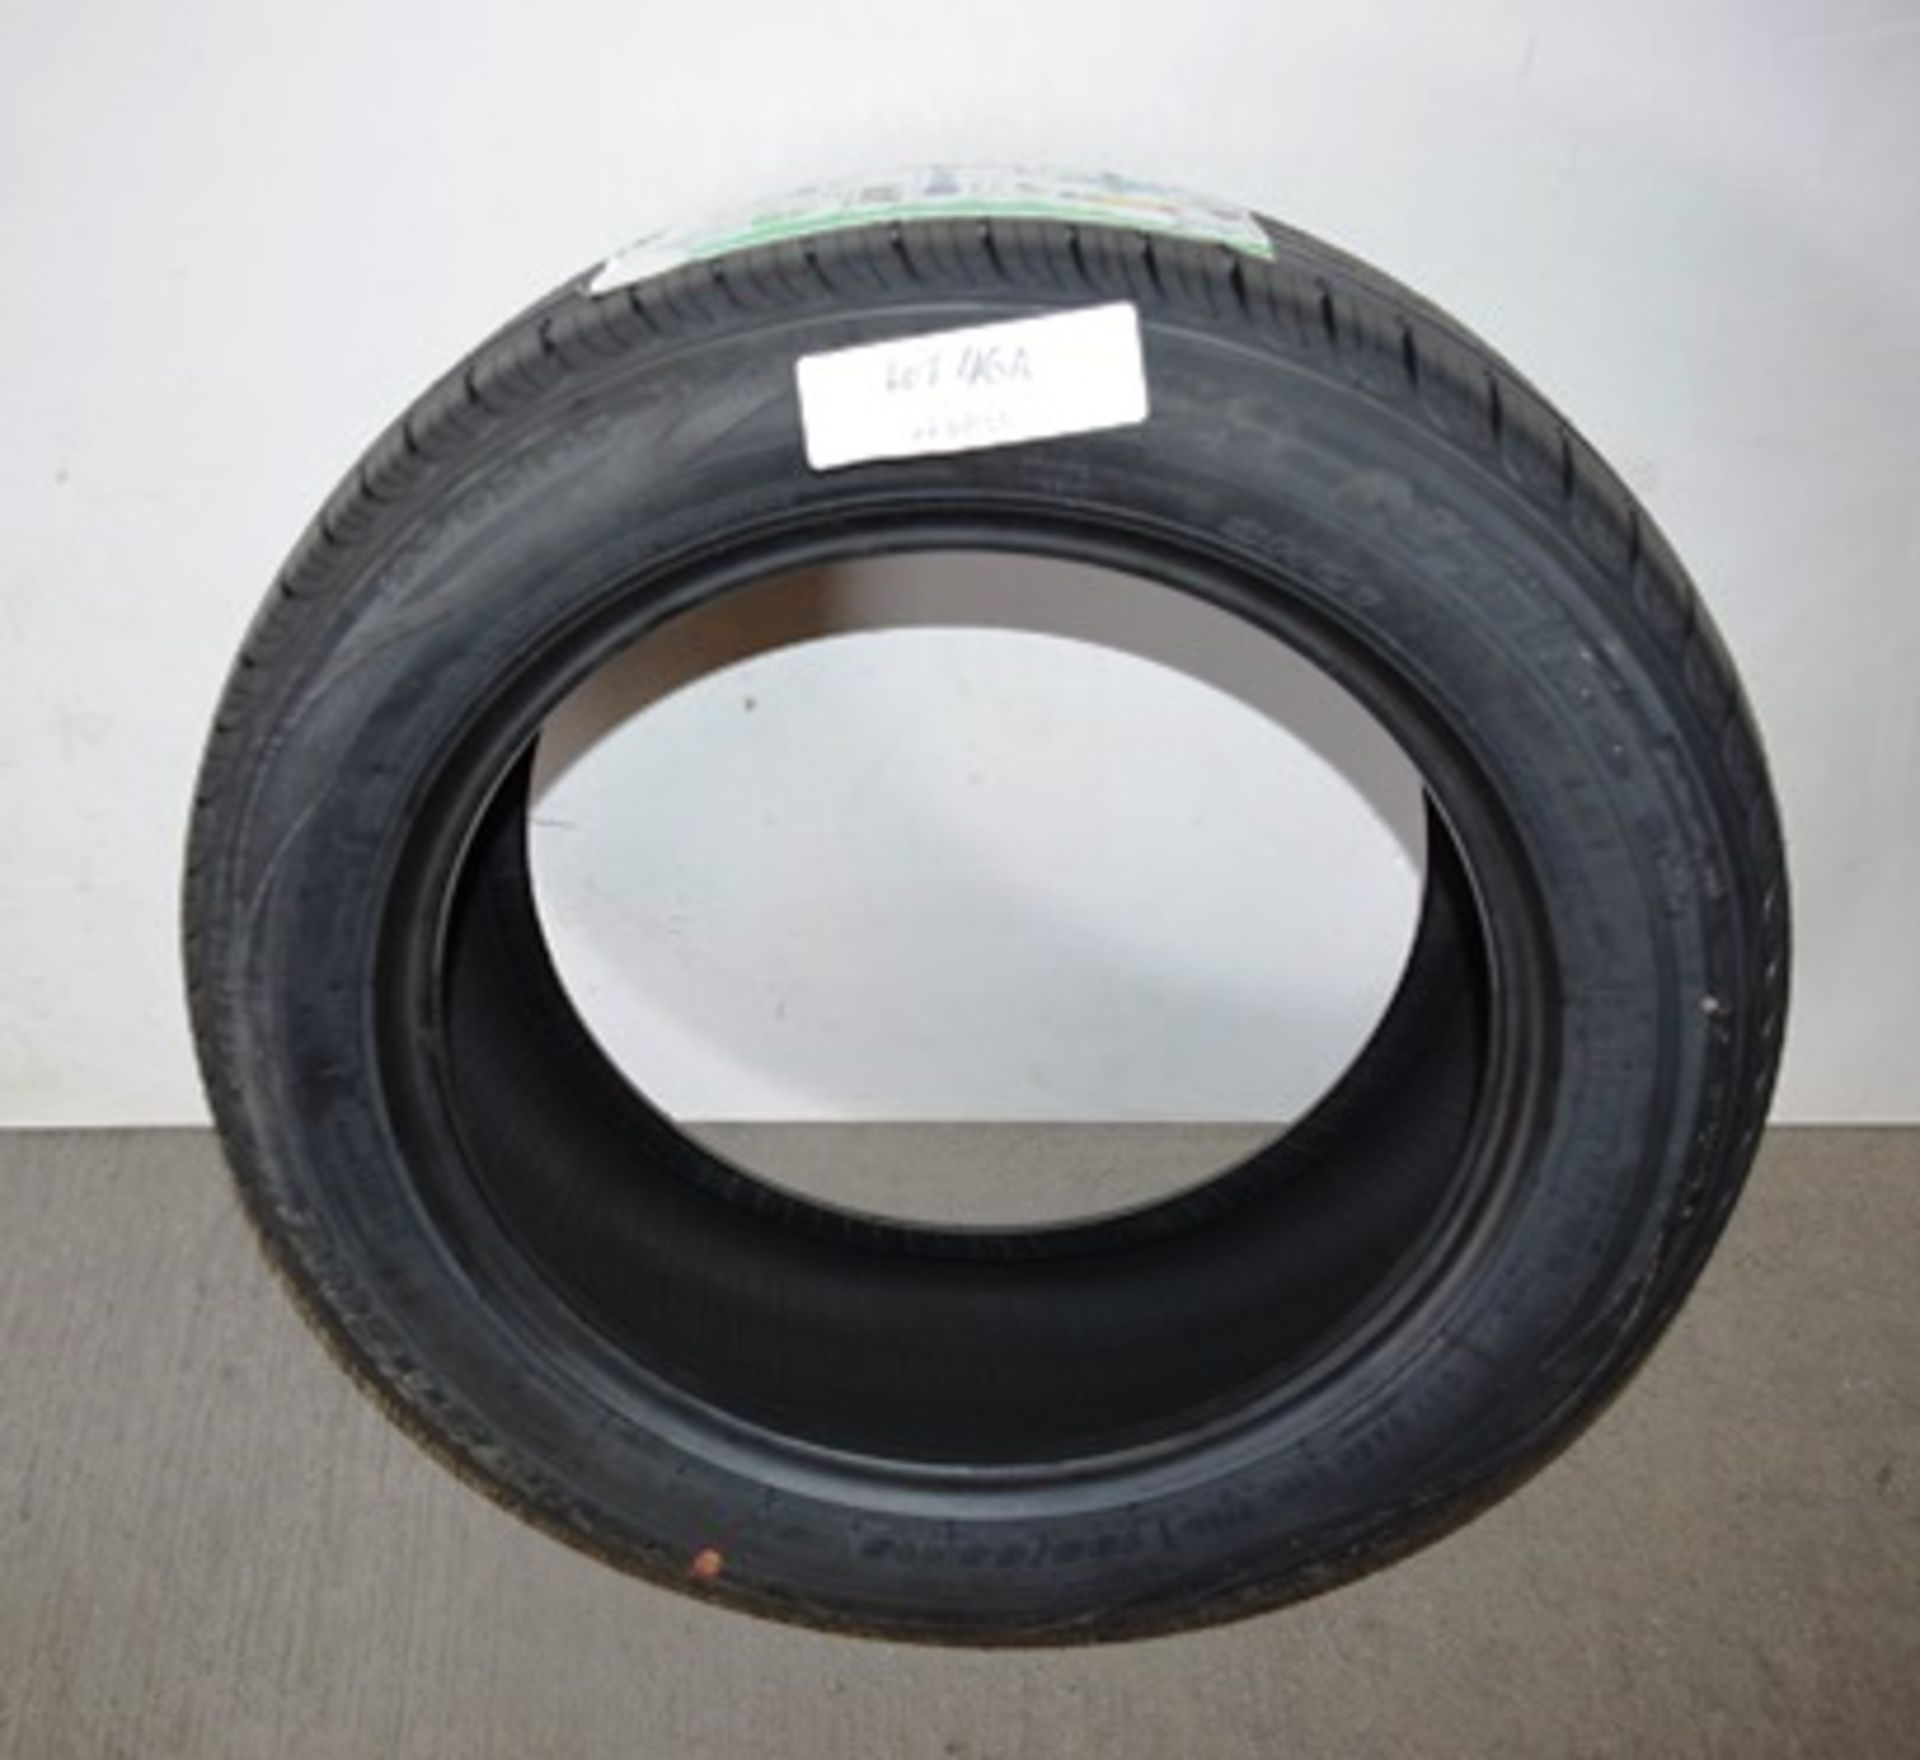 1 z Roadstone N Blue Eco tyre, size 195/55R15 85H - New with label (GS7) - Image 2 of 2